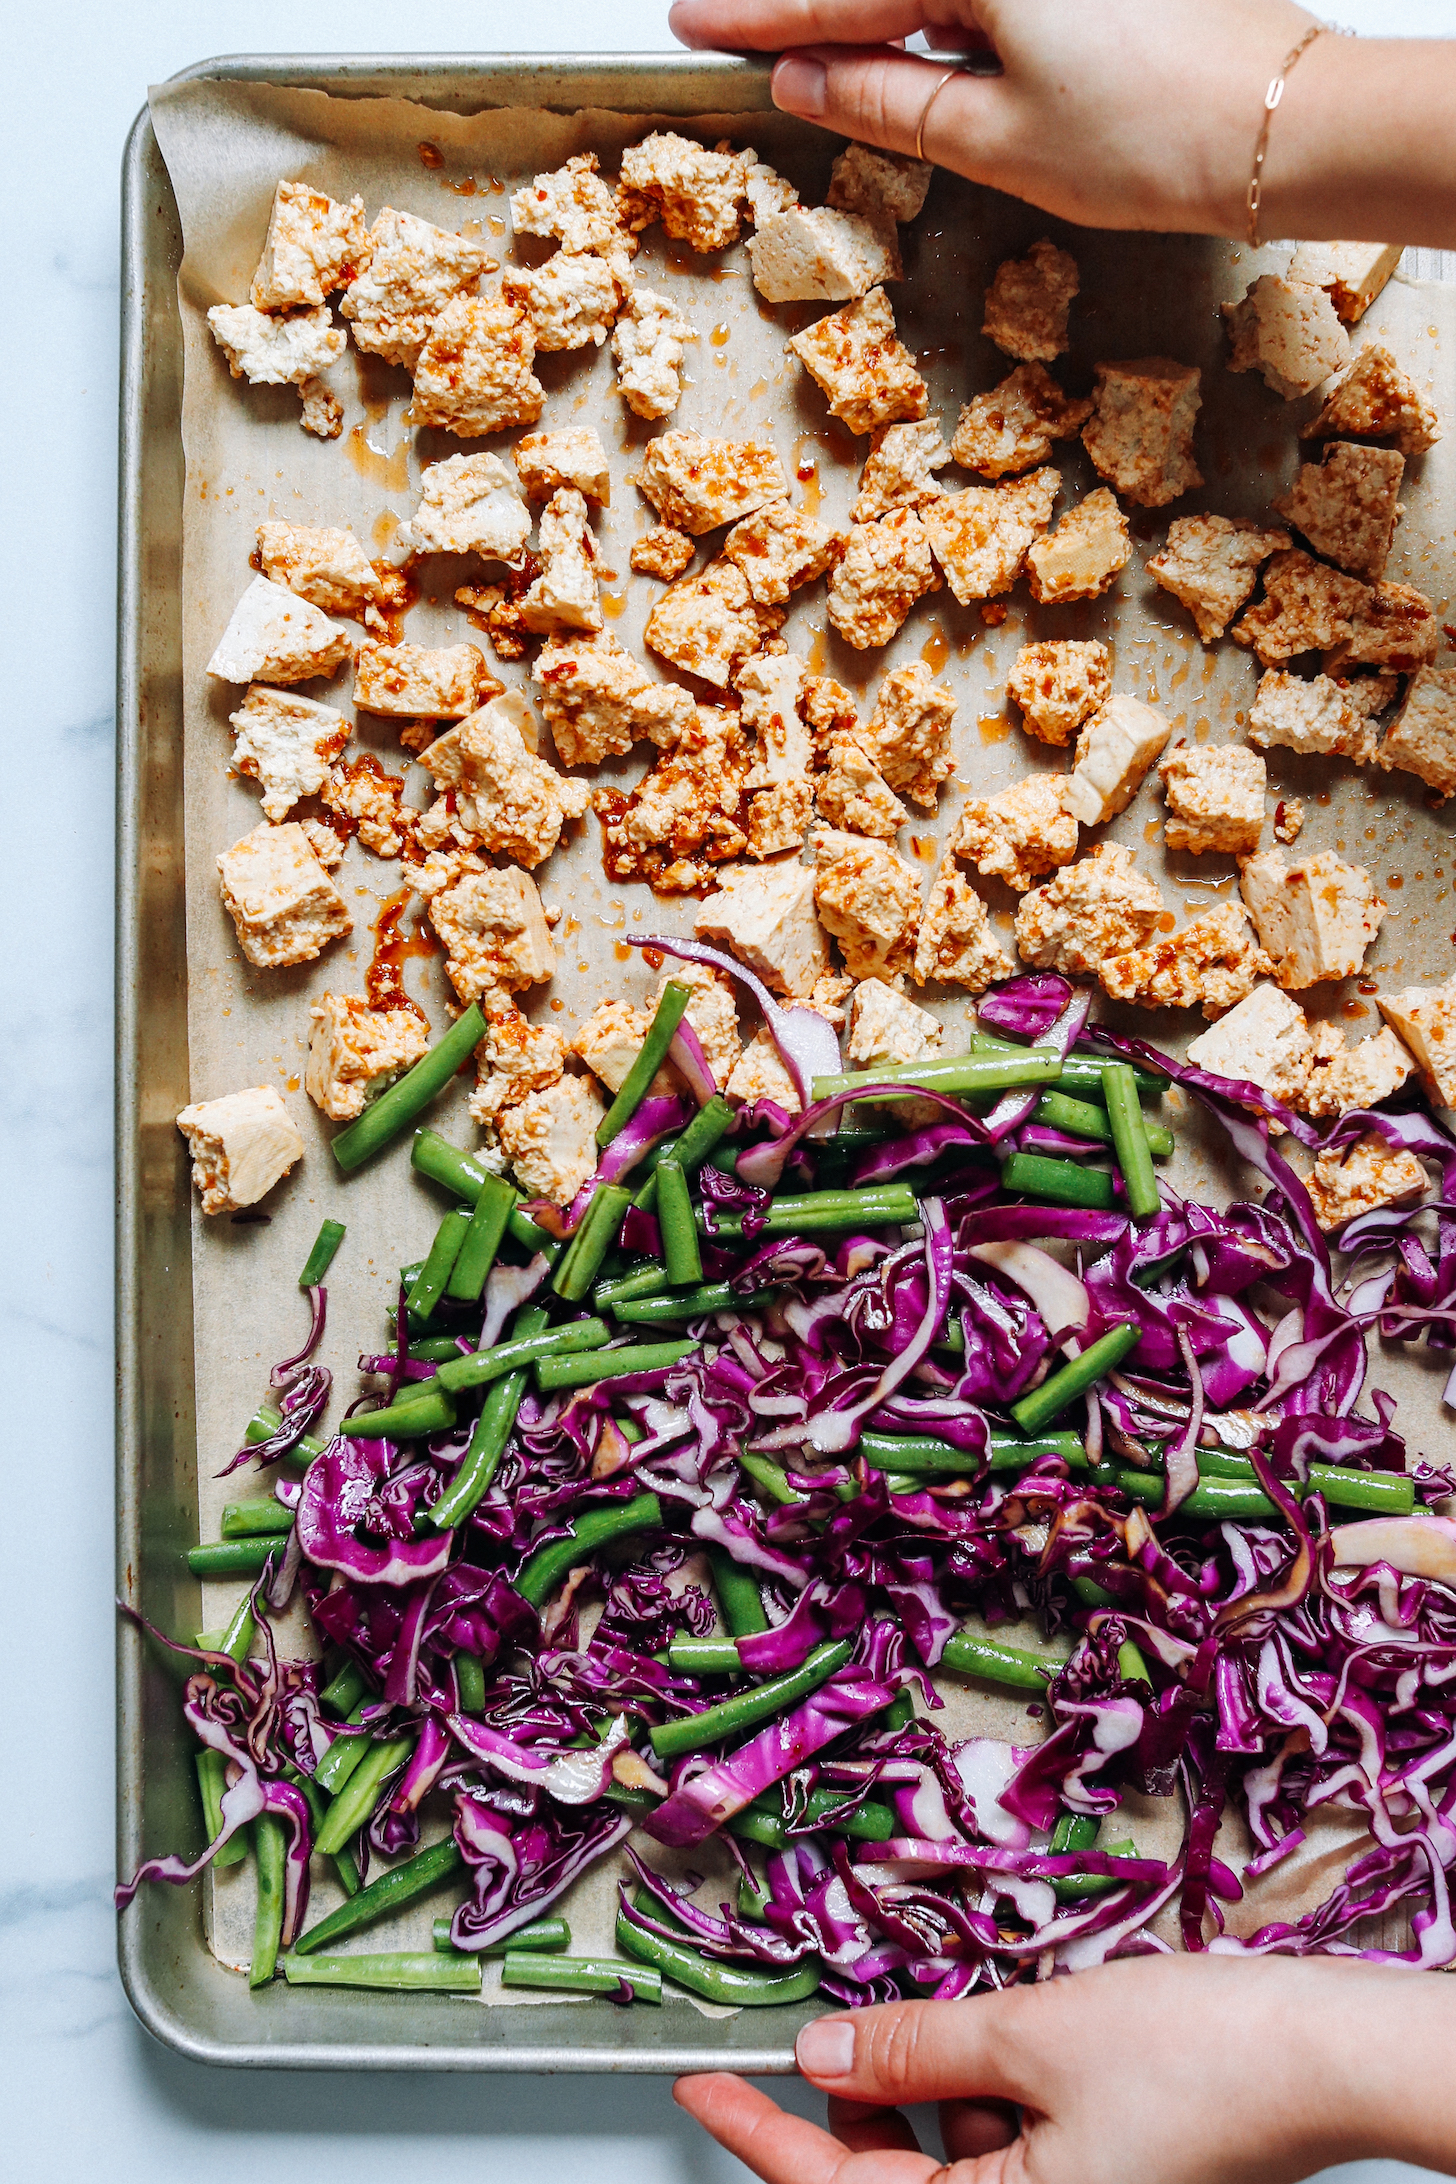 Hands holding a baking sheet of seasoned crumbled tofu, green beans, and red cabbage